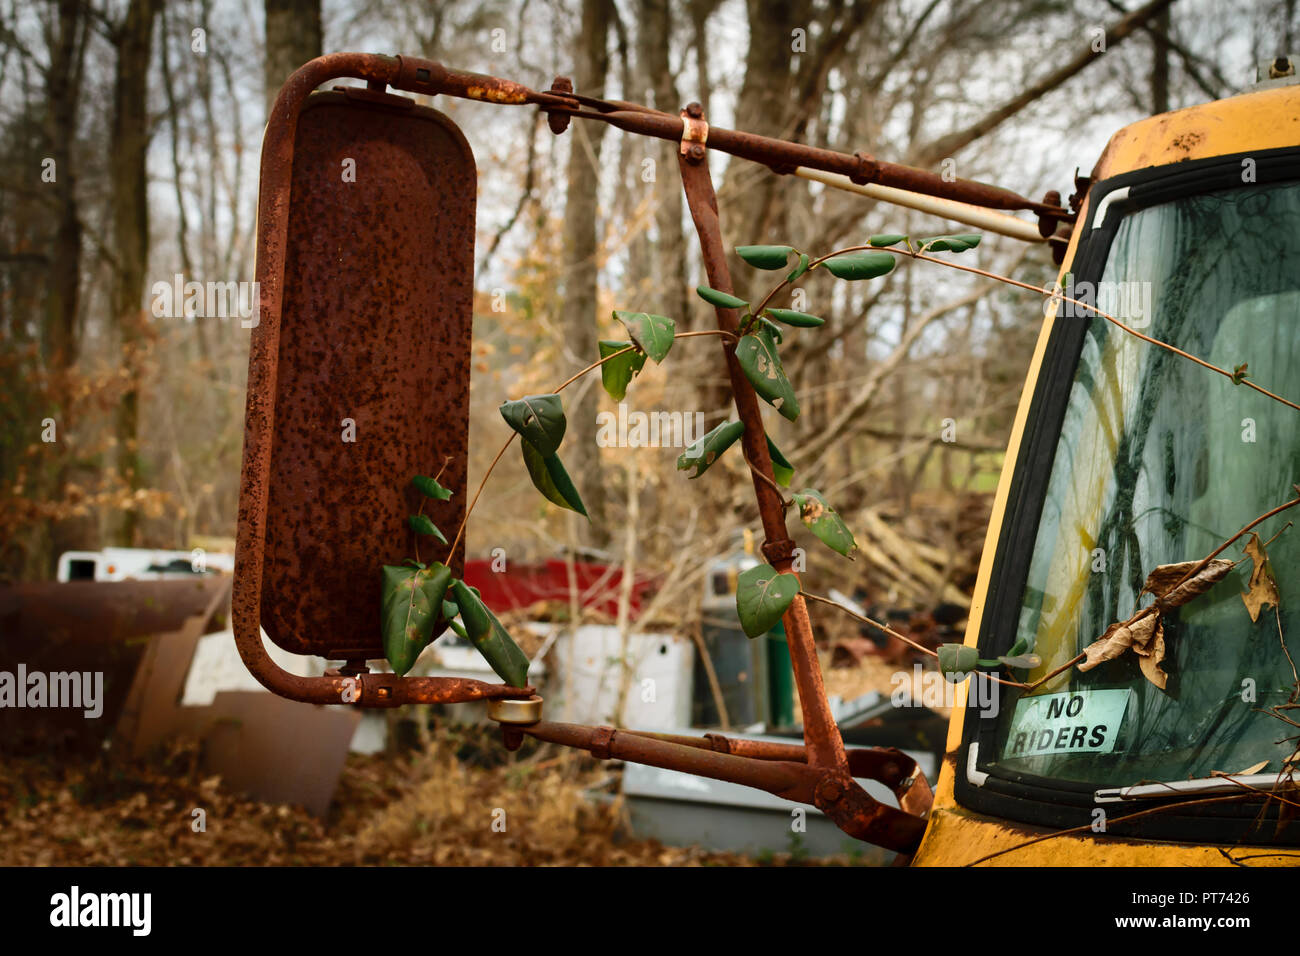 Abandoned work truck with rusted mirror in a wooded area, no riders sticker in the windshield. Stock Photo